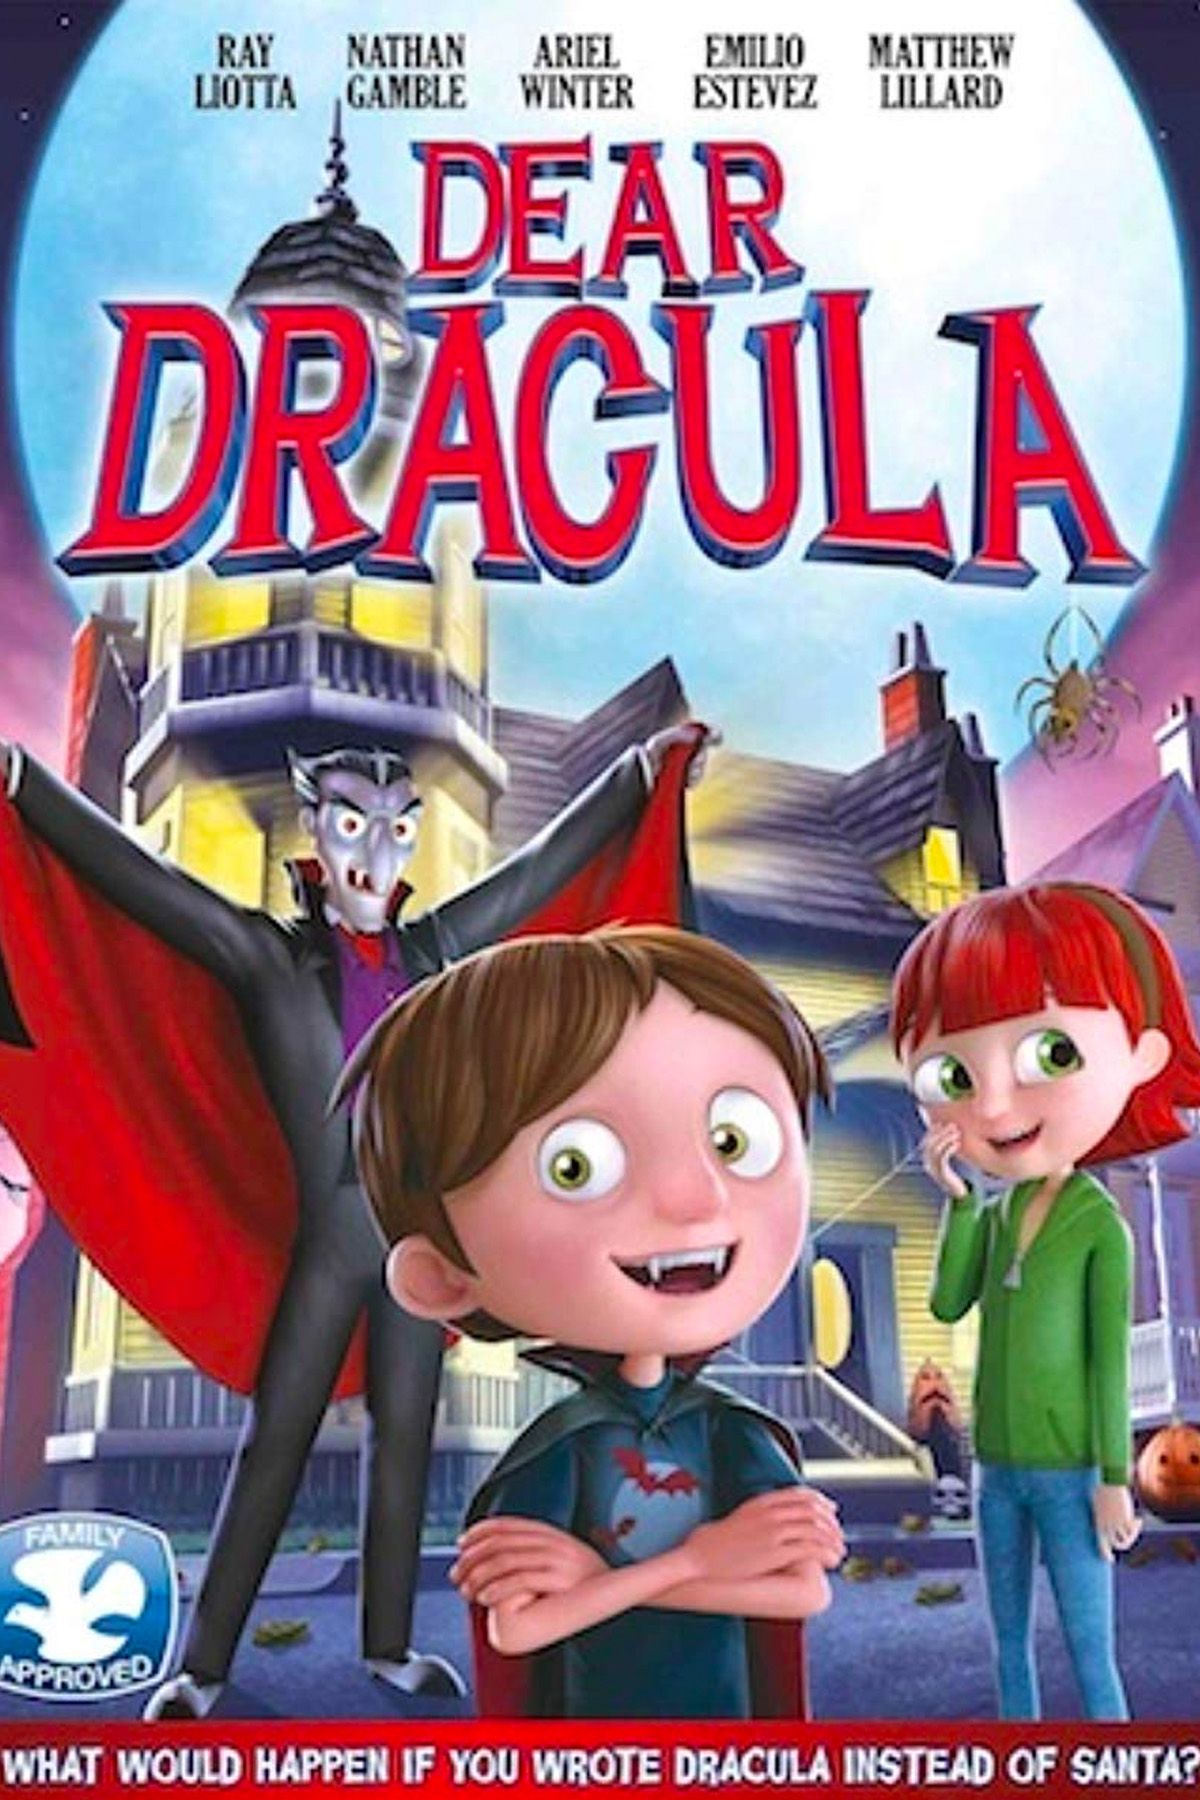 27 FamilyFriendly Animated Movies for Halloween  This West Coast Mommy